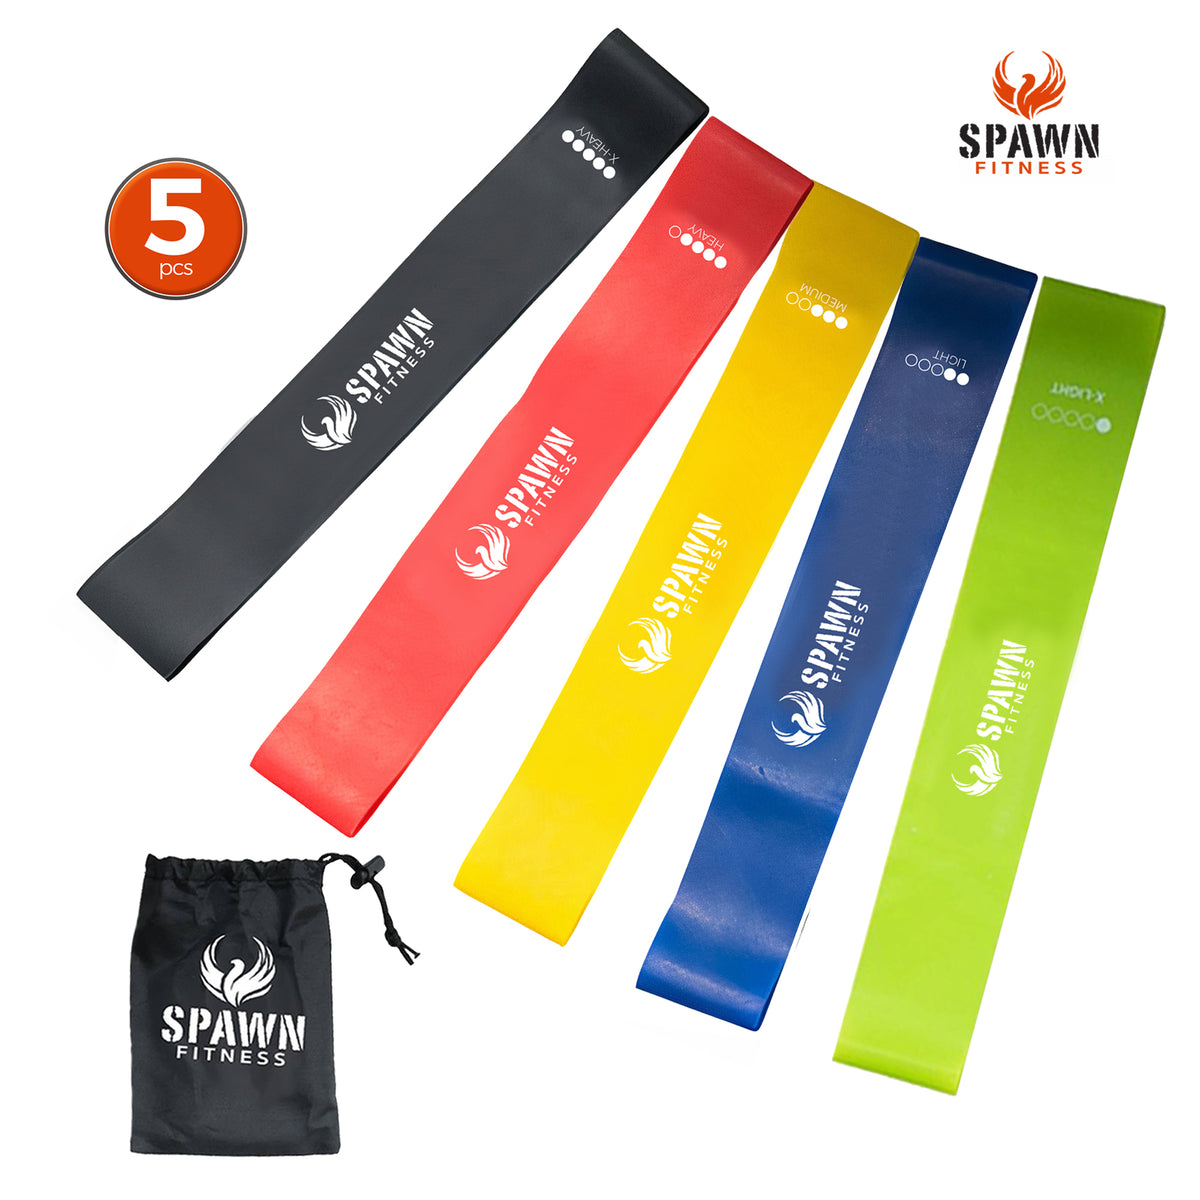 Spawn Fitness Resistance Bands Set of 5 with Exercise Stability